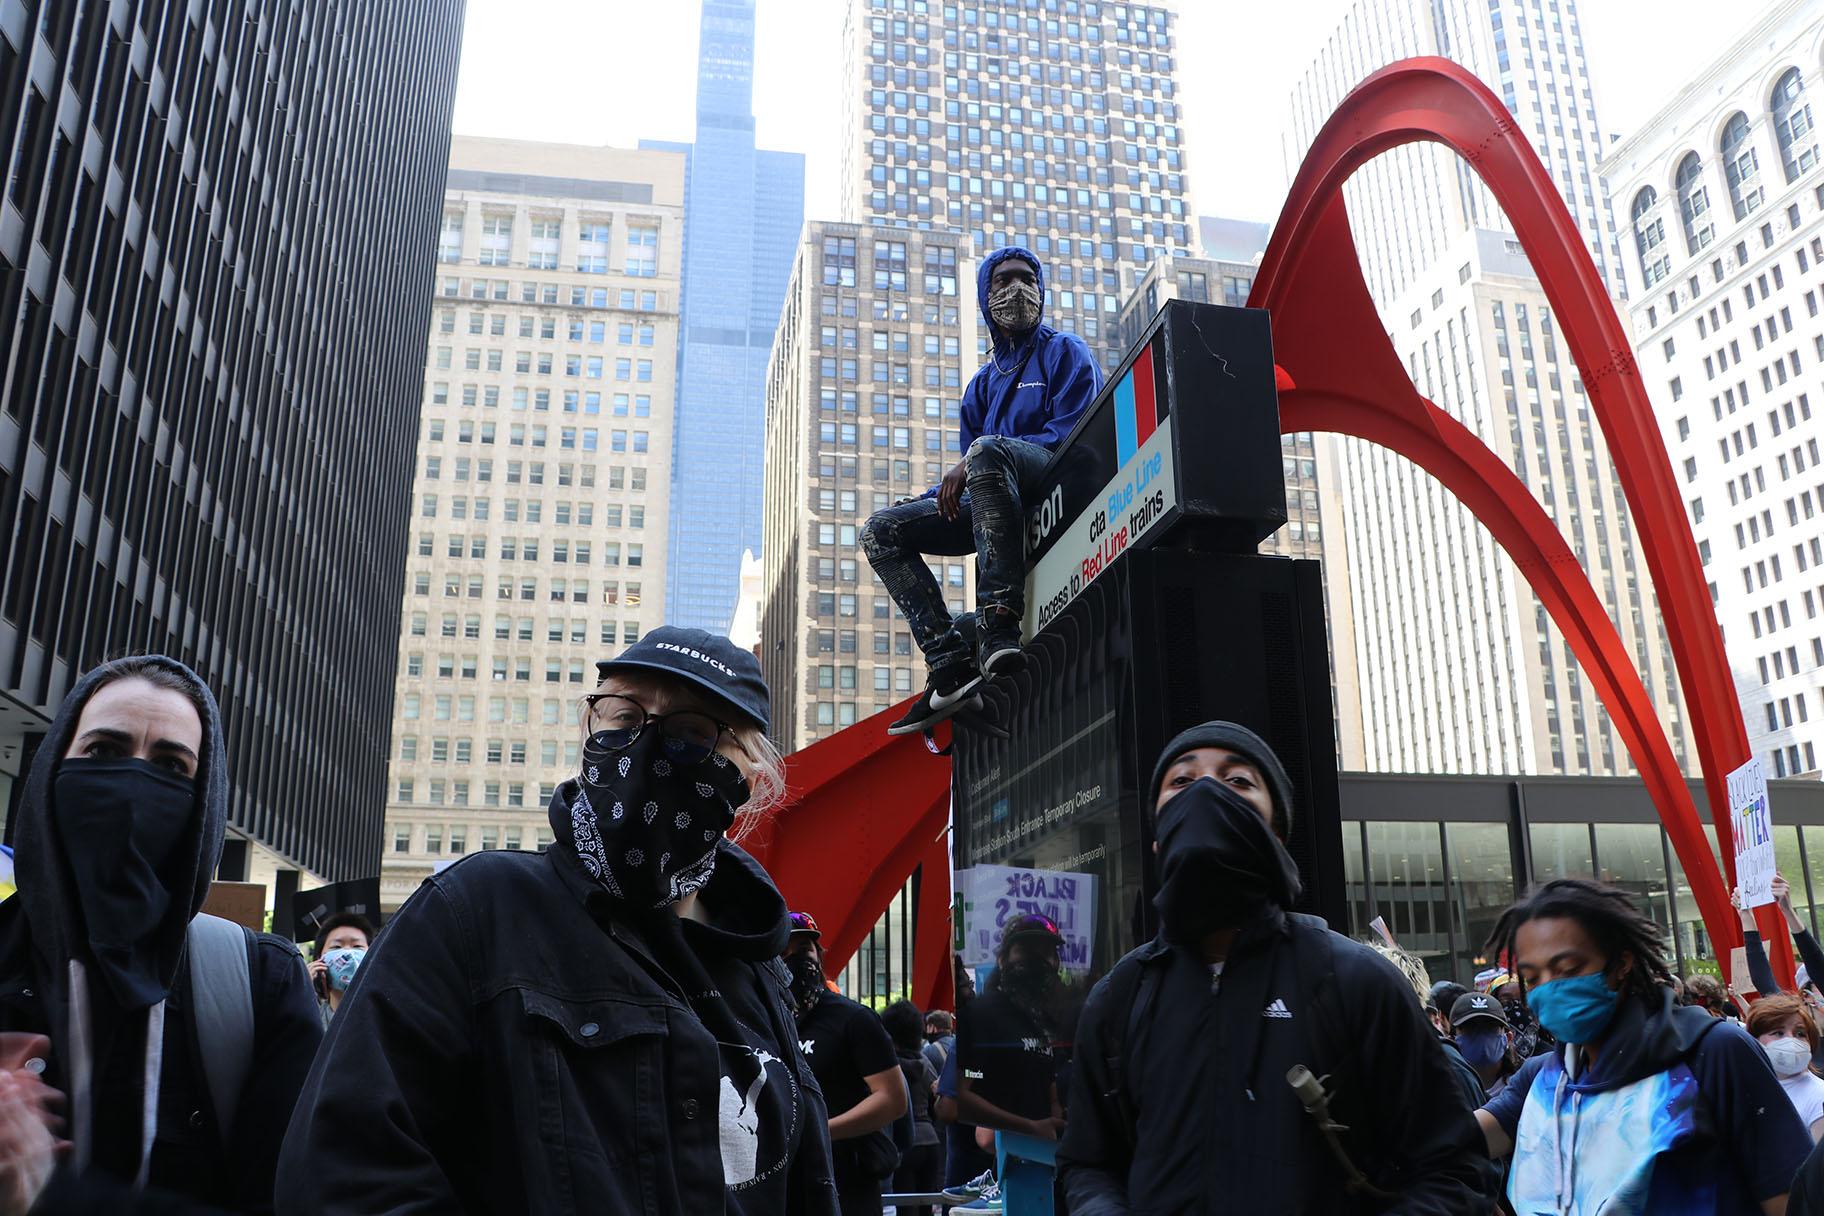 A protester sits on a CTA sign in front of Federal Plaza. (Evan Garcia / WTTW News)